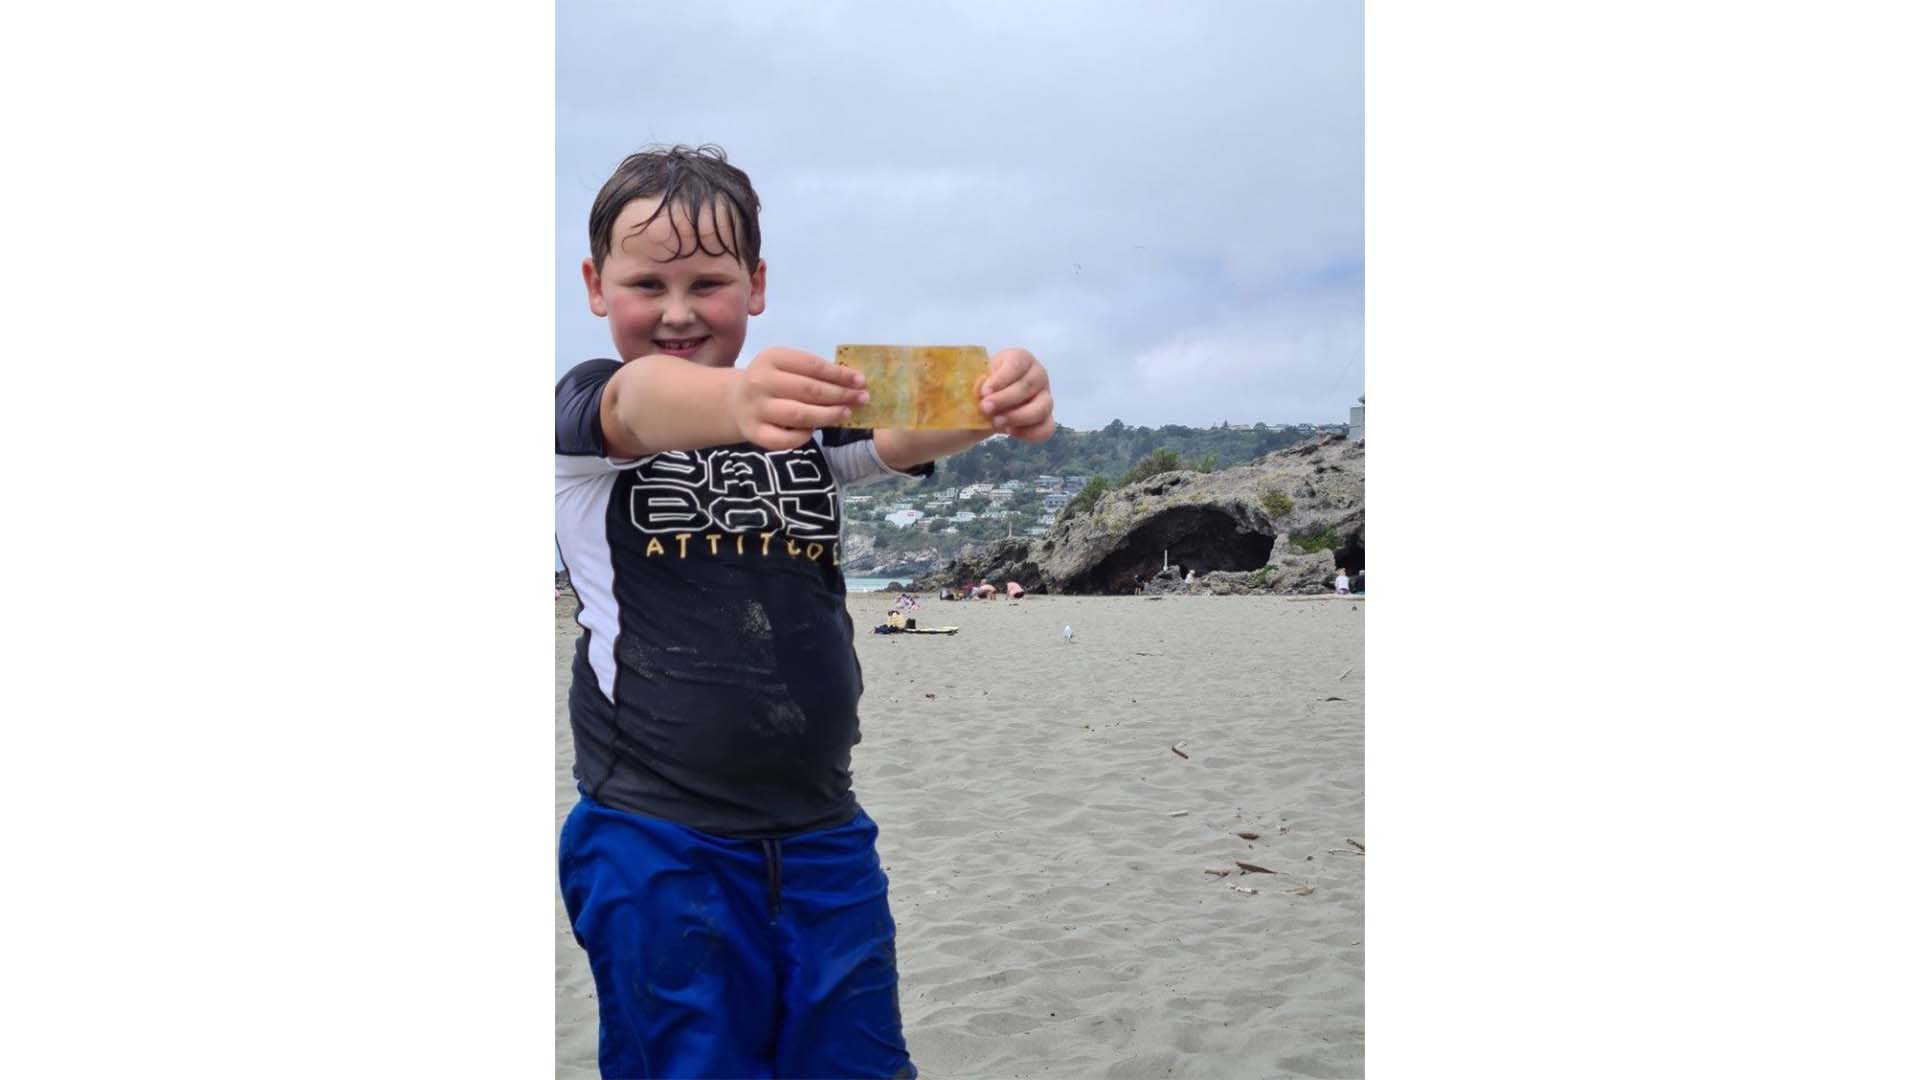 Zayne holding a $5 note discovered at Sumner Beach, sold on Trade Me for $1,000, supporting his dream.